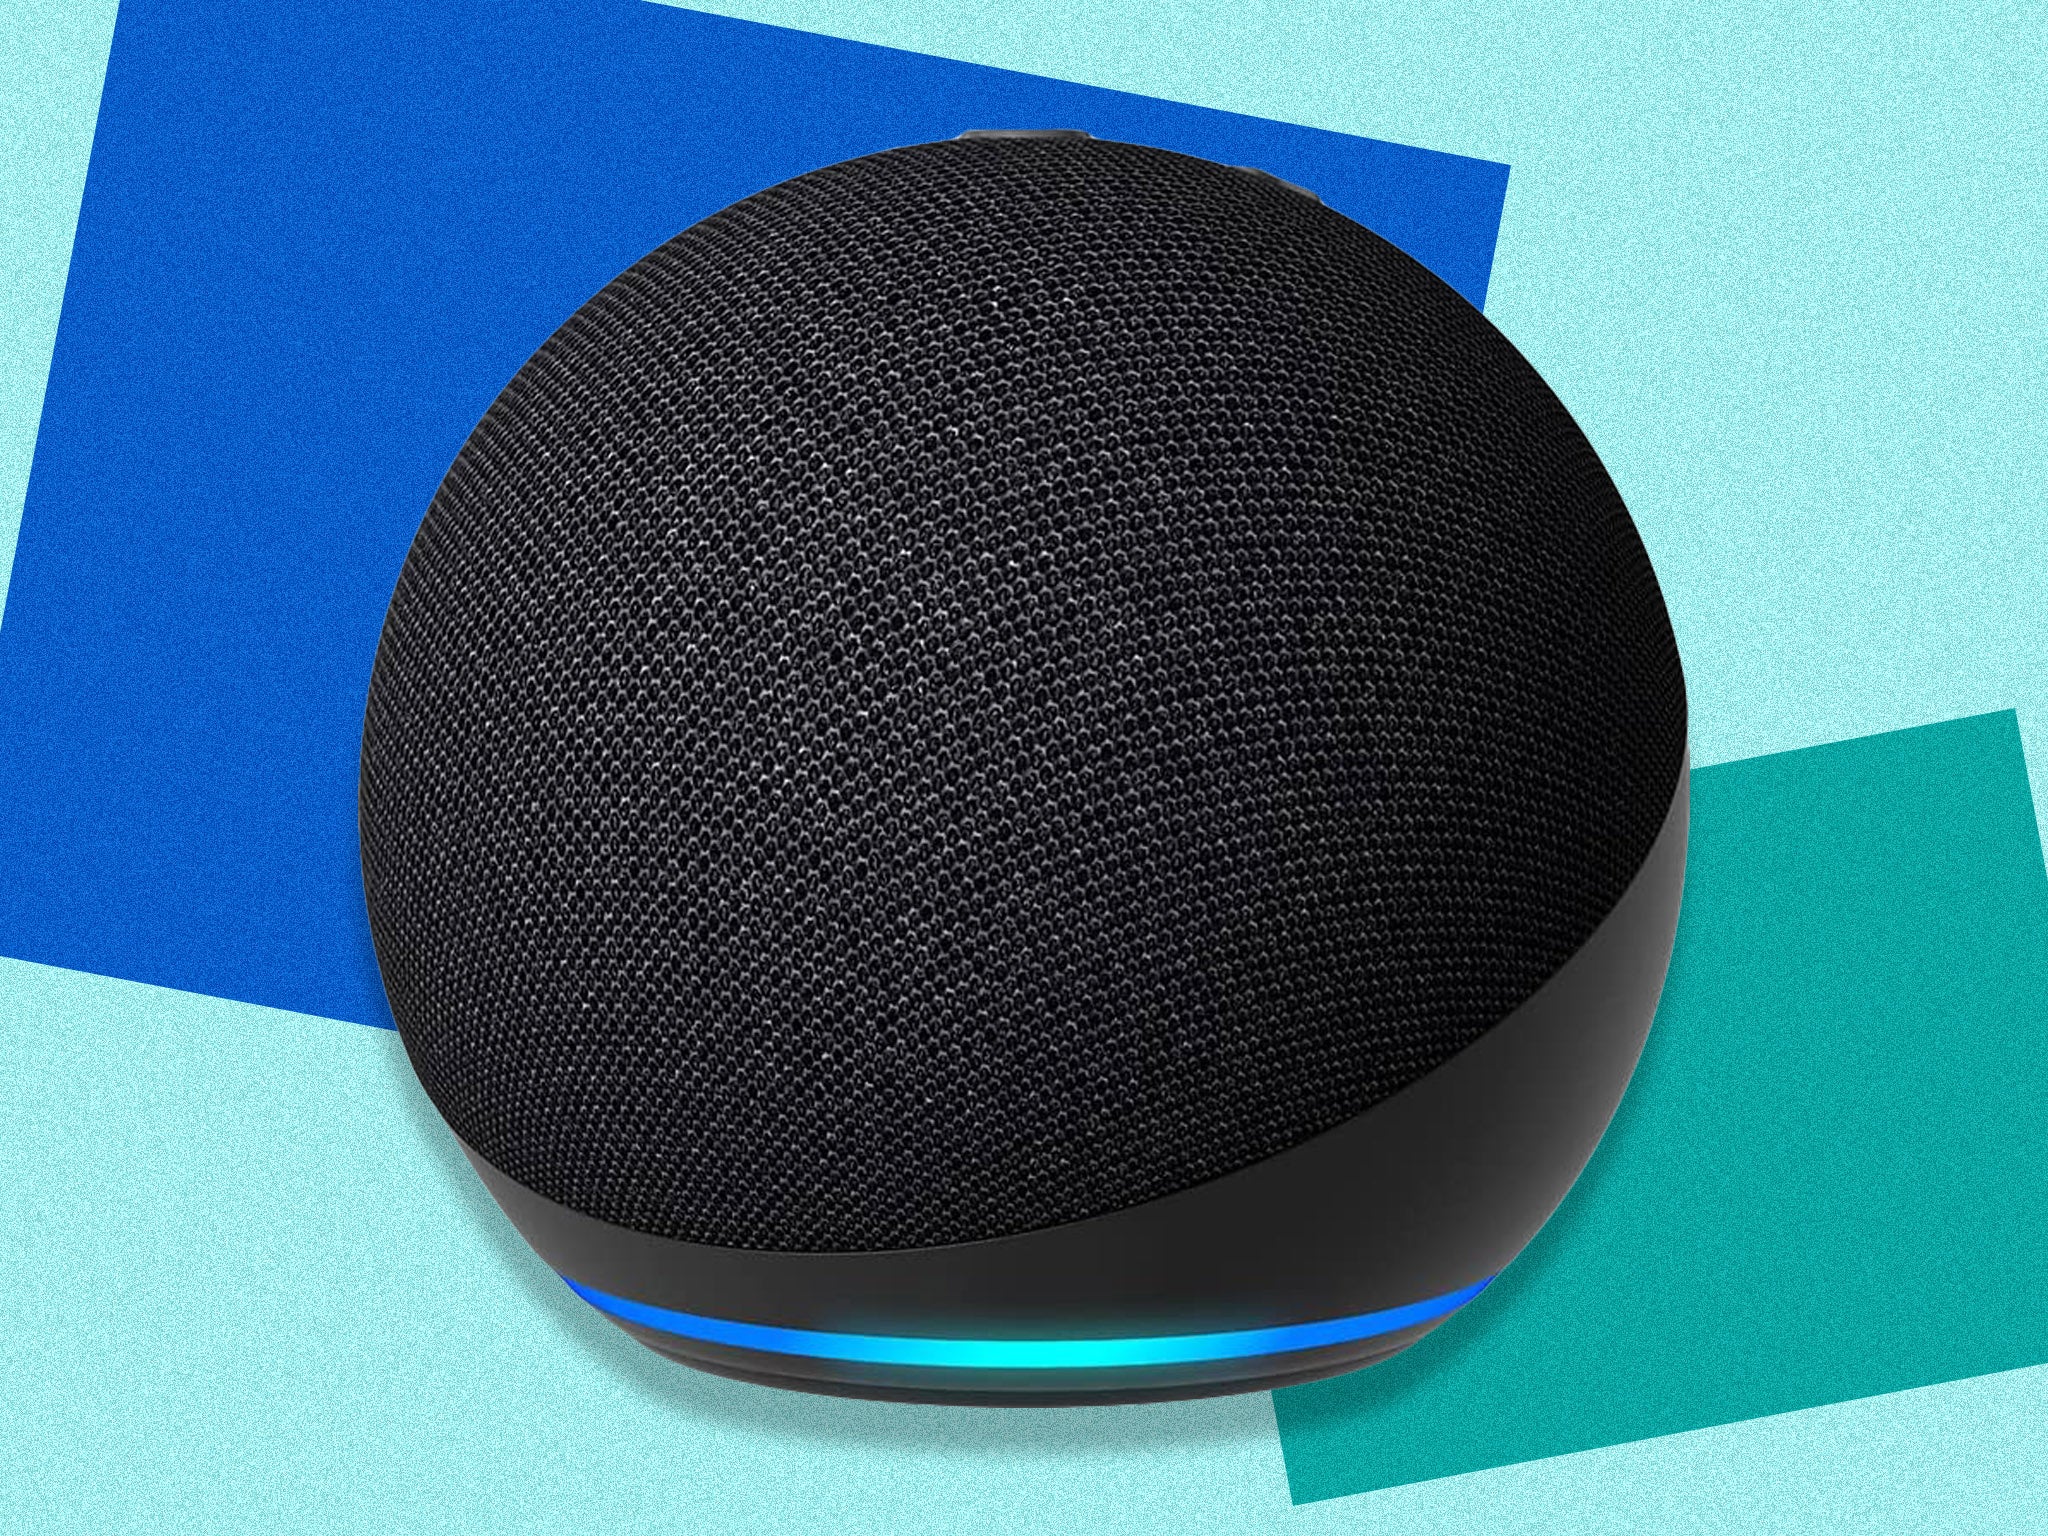 The Echo dot is available in black, blue and white